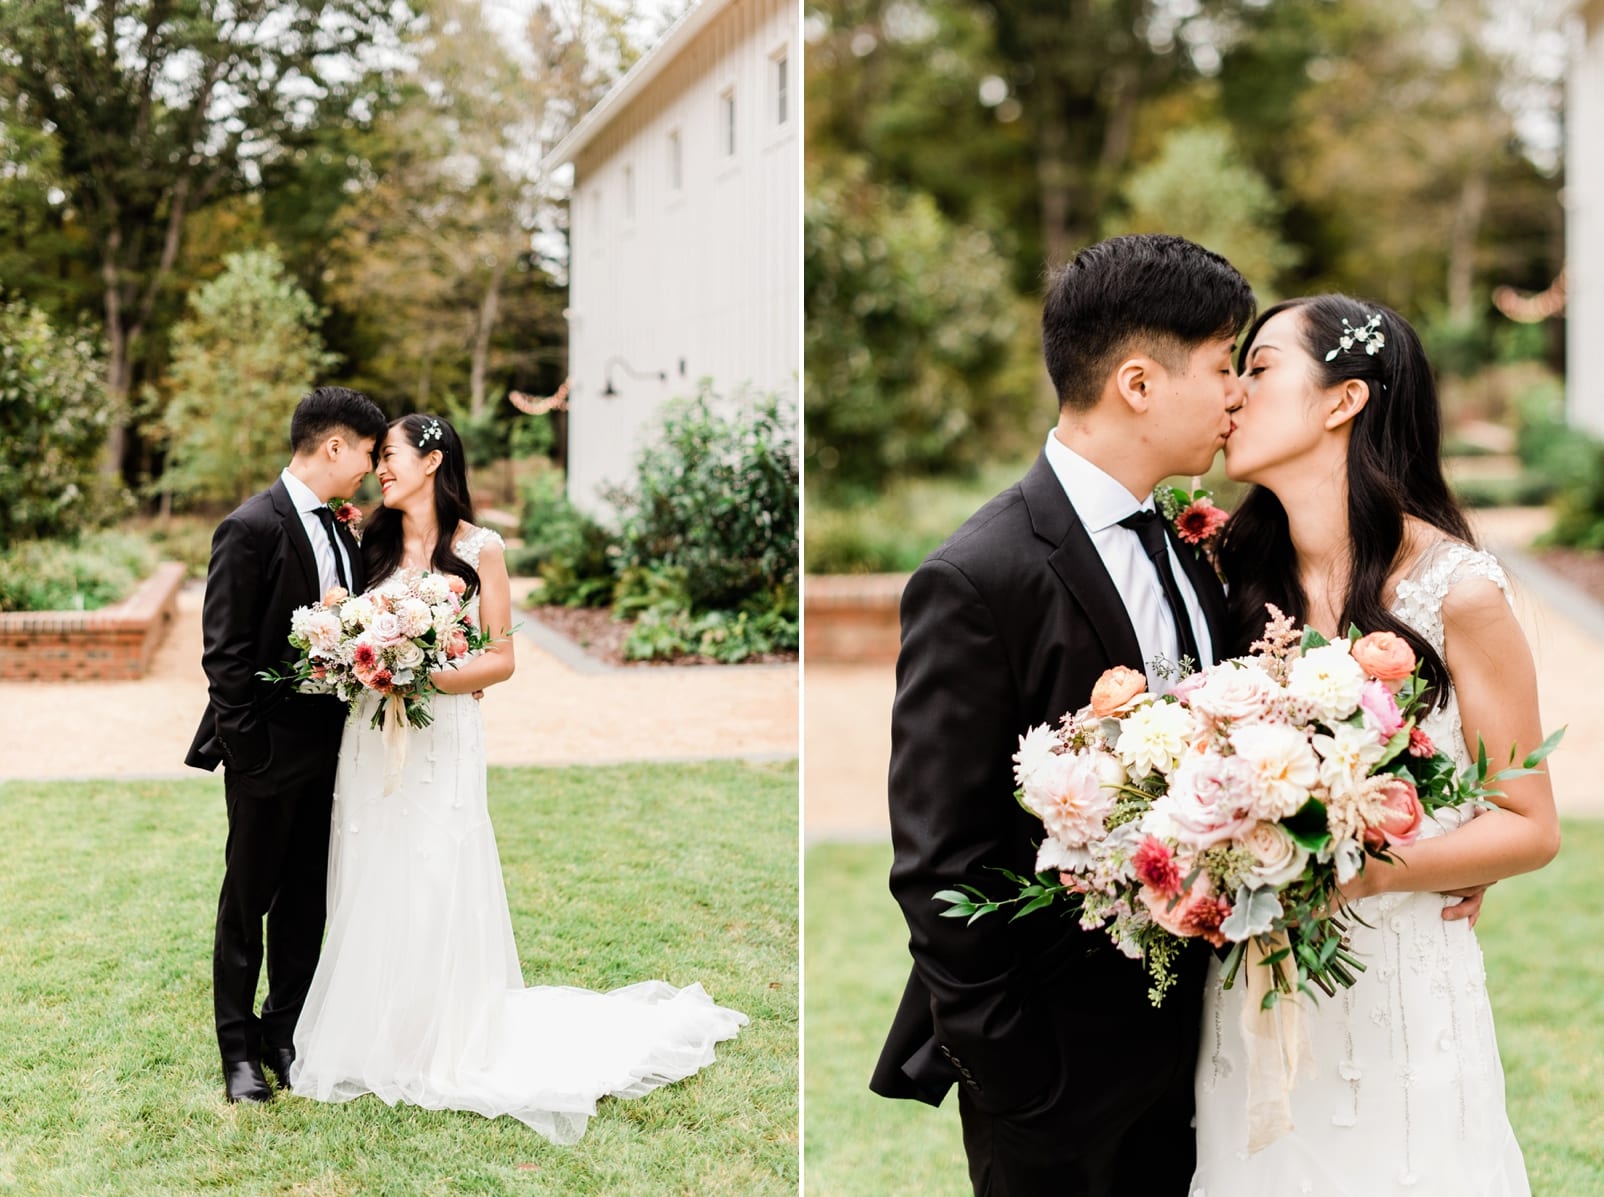 Barn of Chapel Hill bride and groom kissing photo